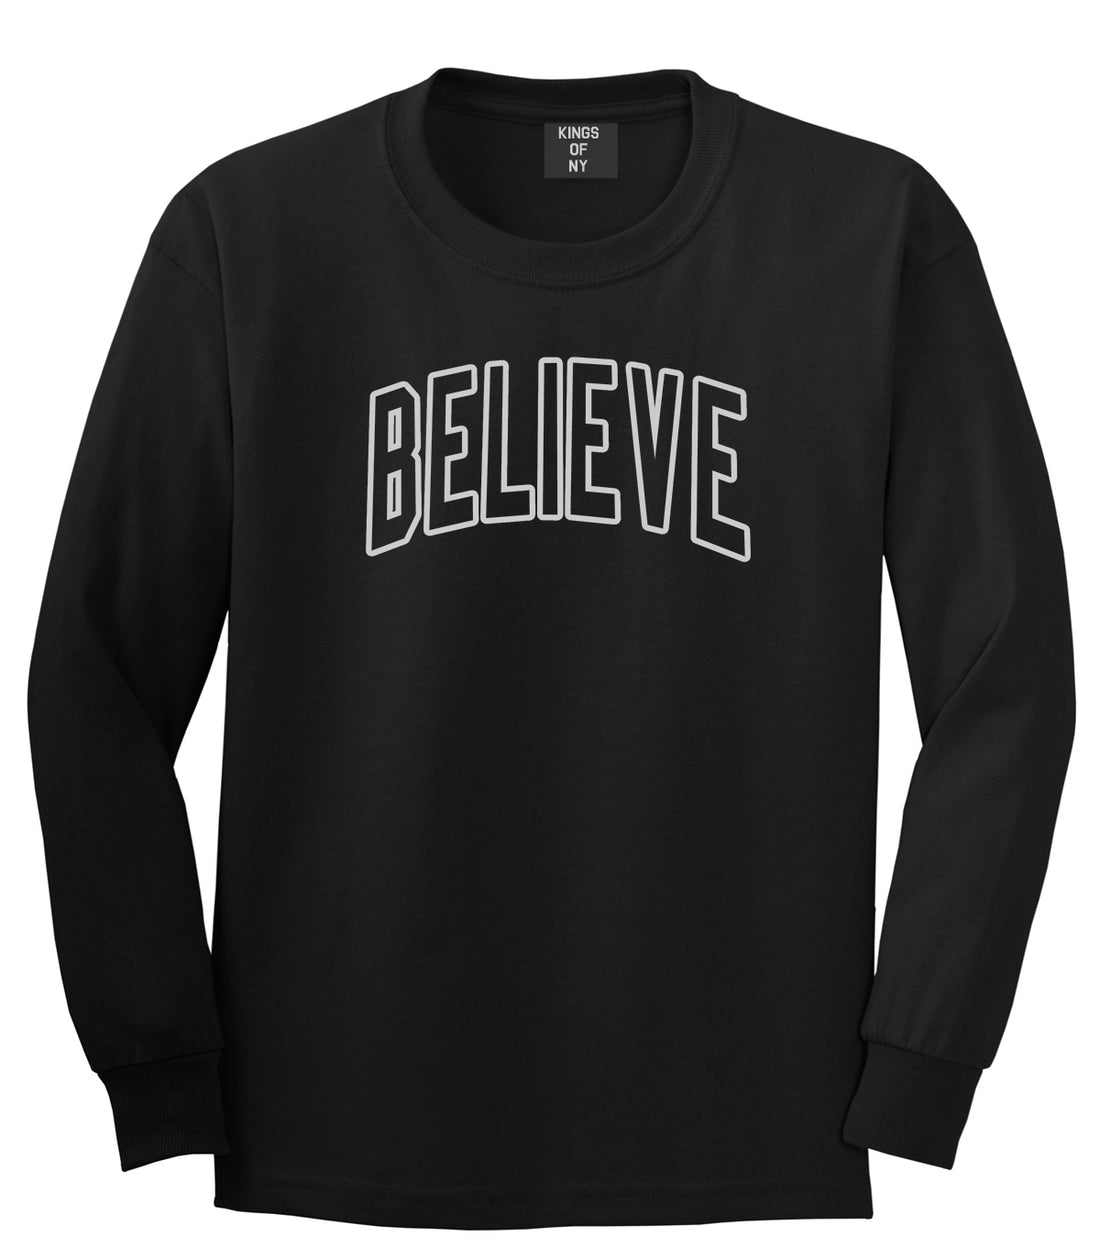 Believe Outline Mens Long Sleeve T-Shirt Black by Kings Of NY